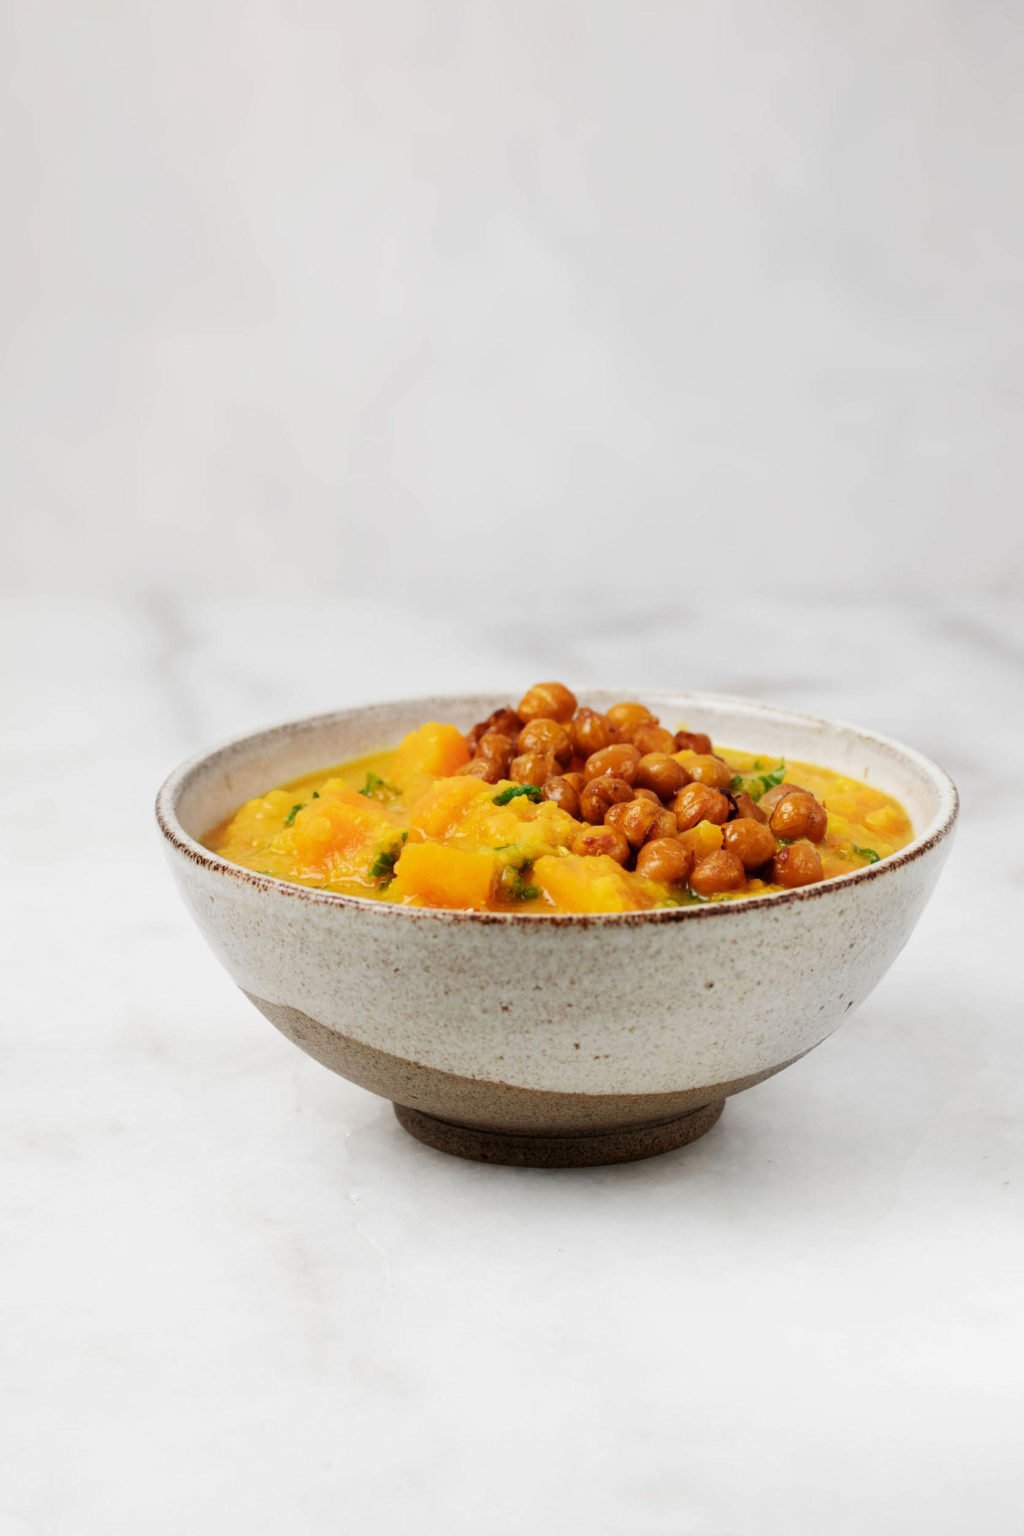 A white and brown ceramic bowl holds a portion of red lentil butternut soup. It rests on a white marble surface.